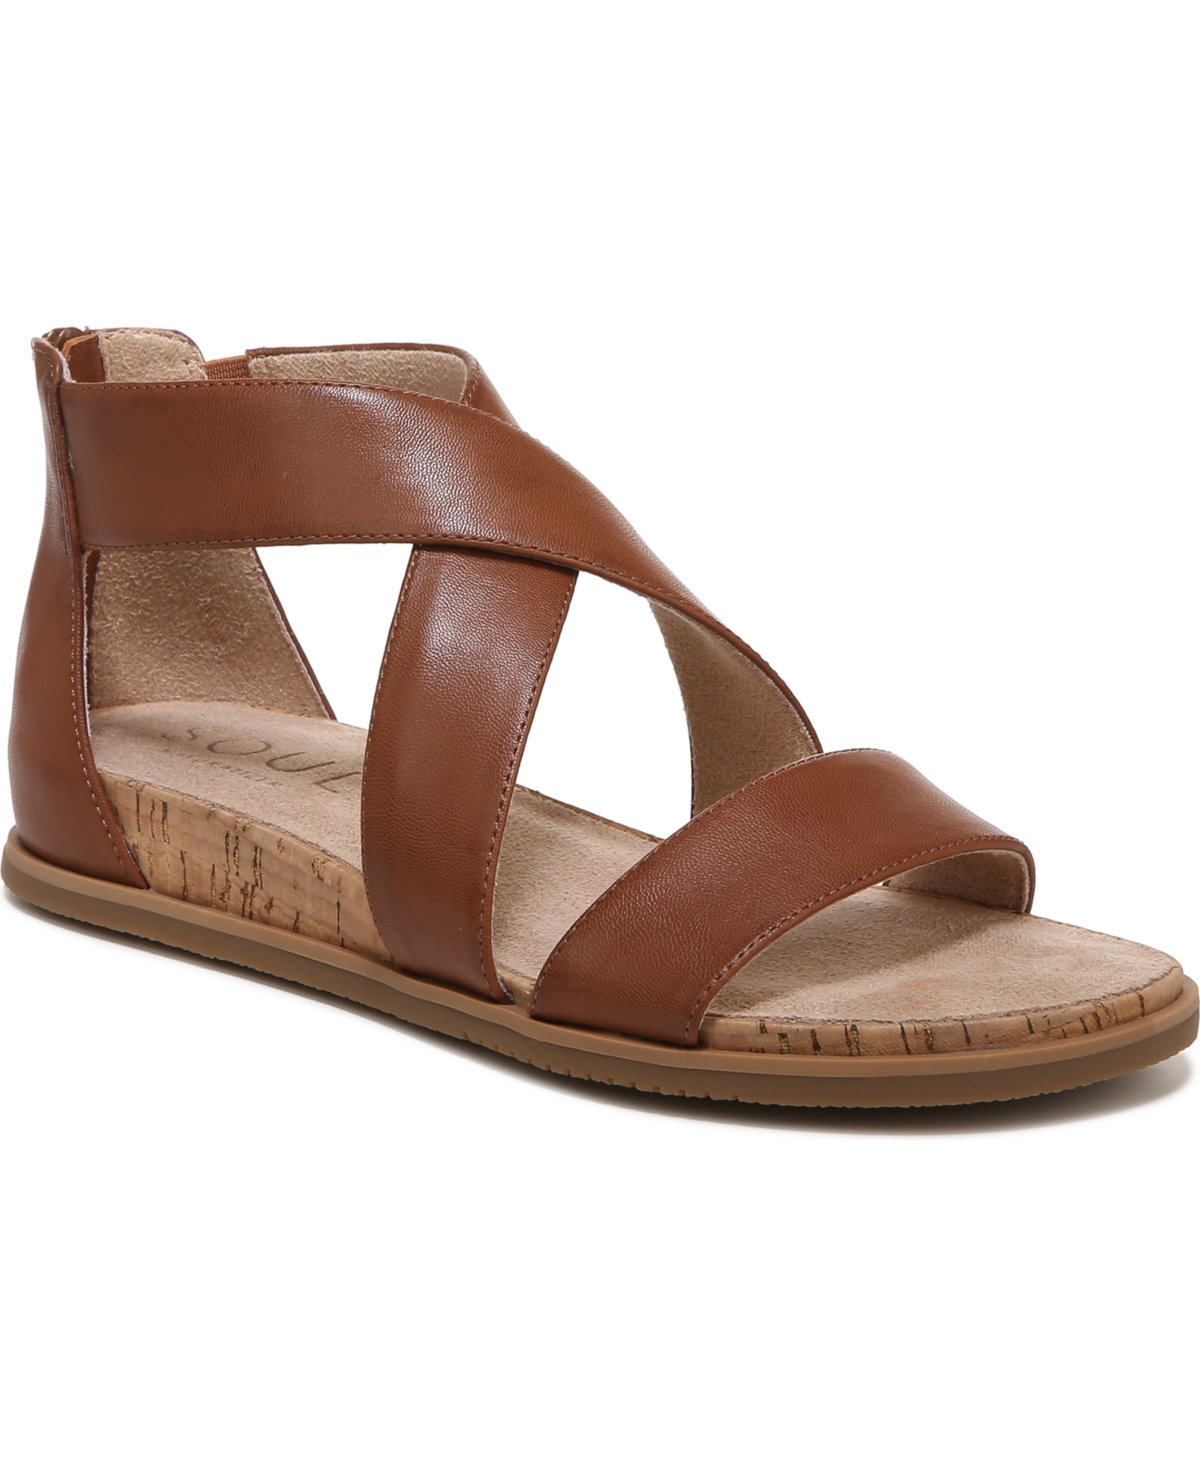 Soul Naturalizer Cindi Strappy Sandals Women's Shoes In Toffee Smooth Faux Leather